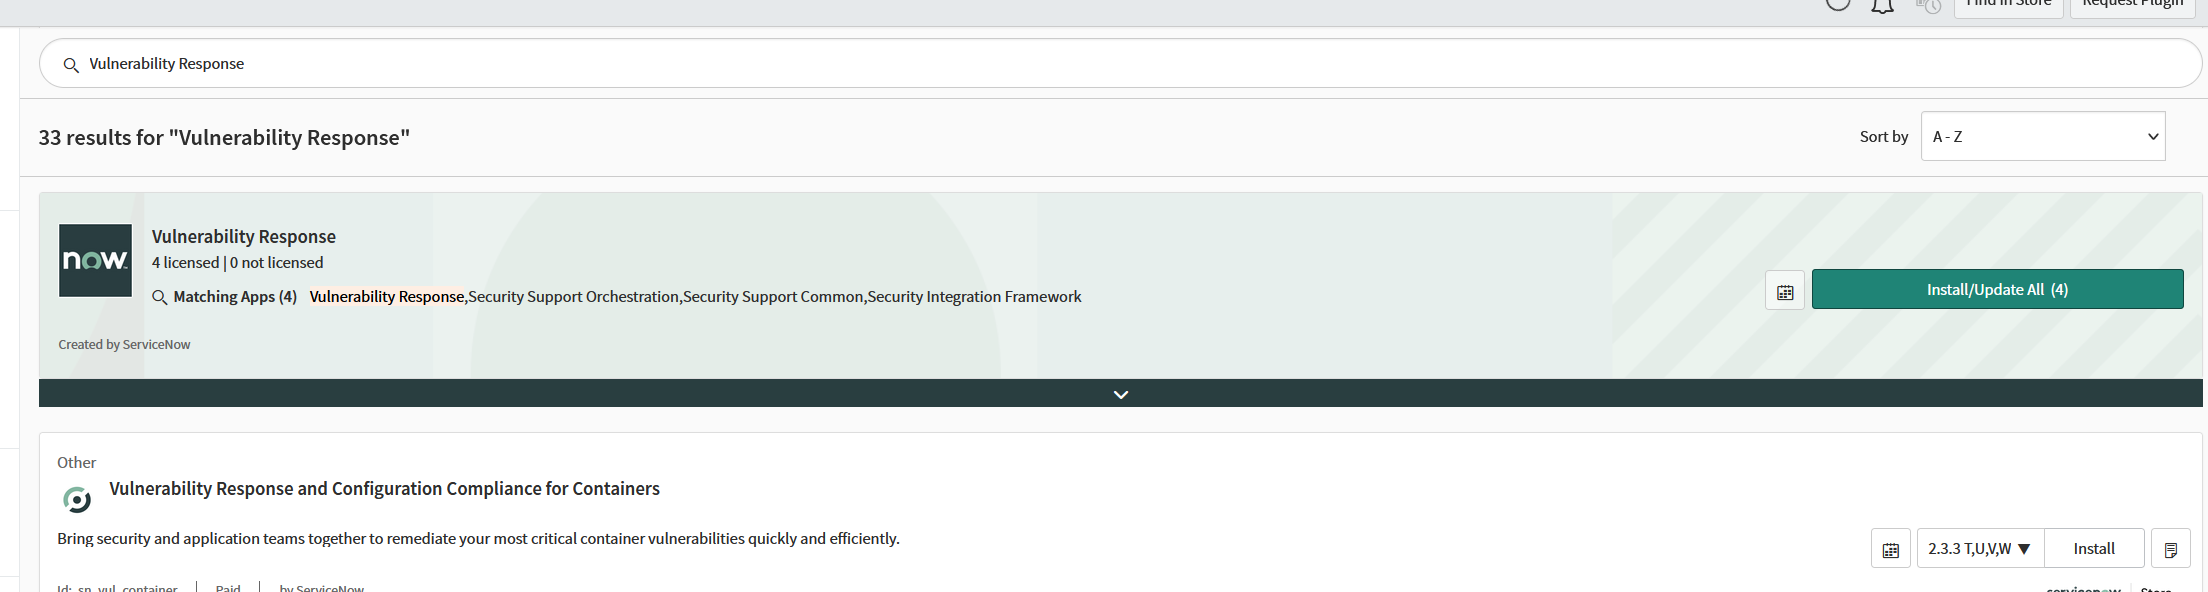 Integration-servicenow-vulnerability-response.png